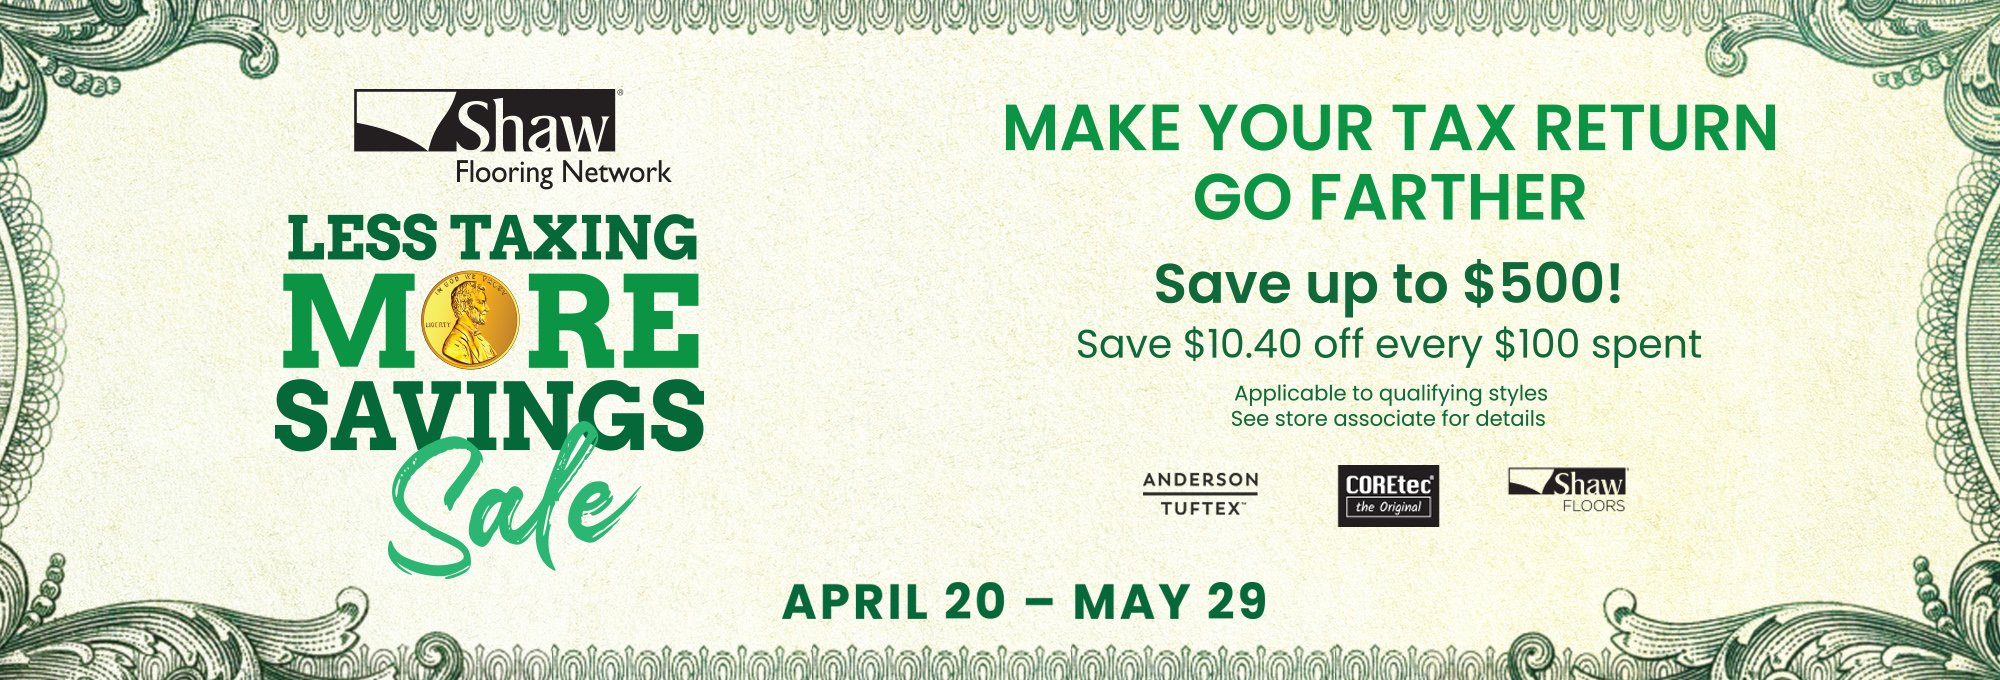 Shaw Floors - Less Taxing More Savings Promotional Hero Banner Image